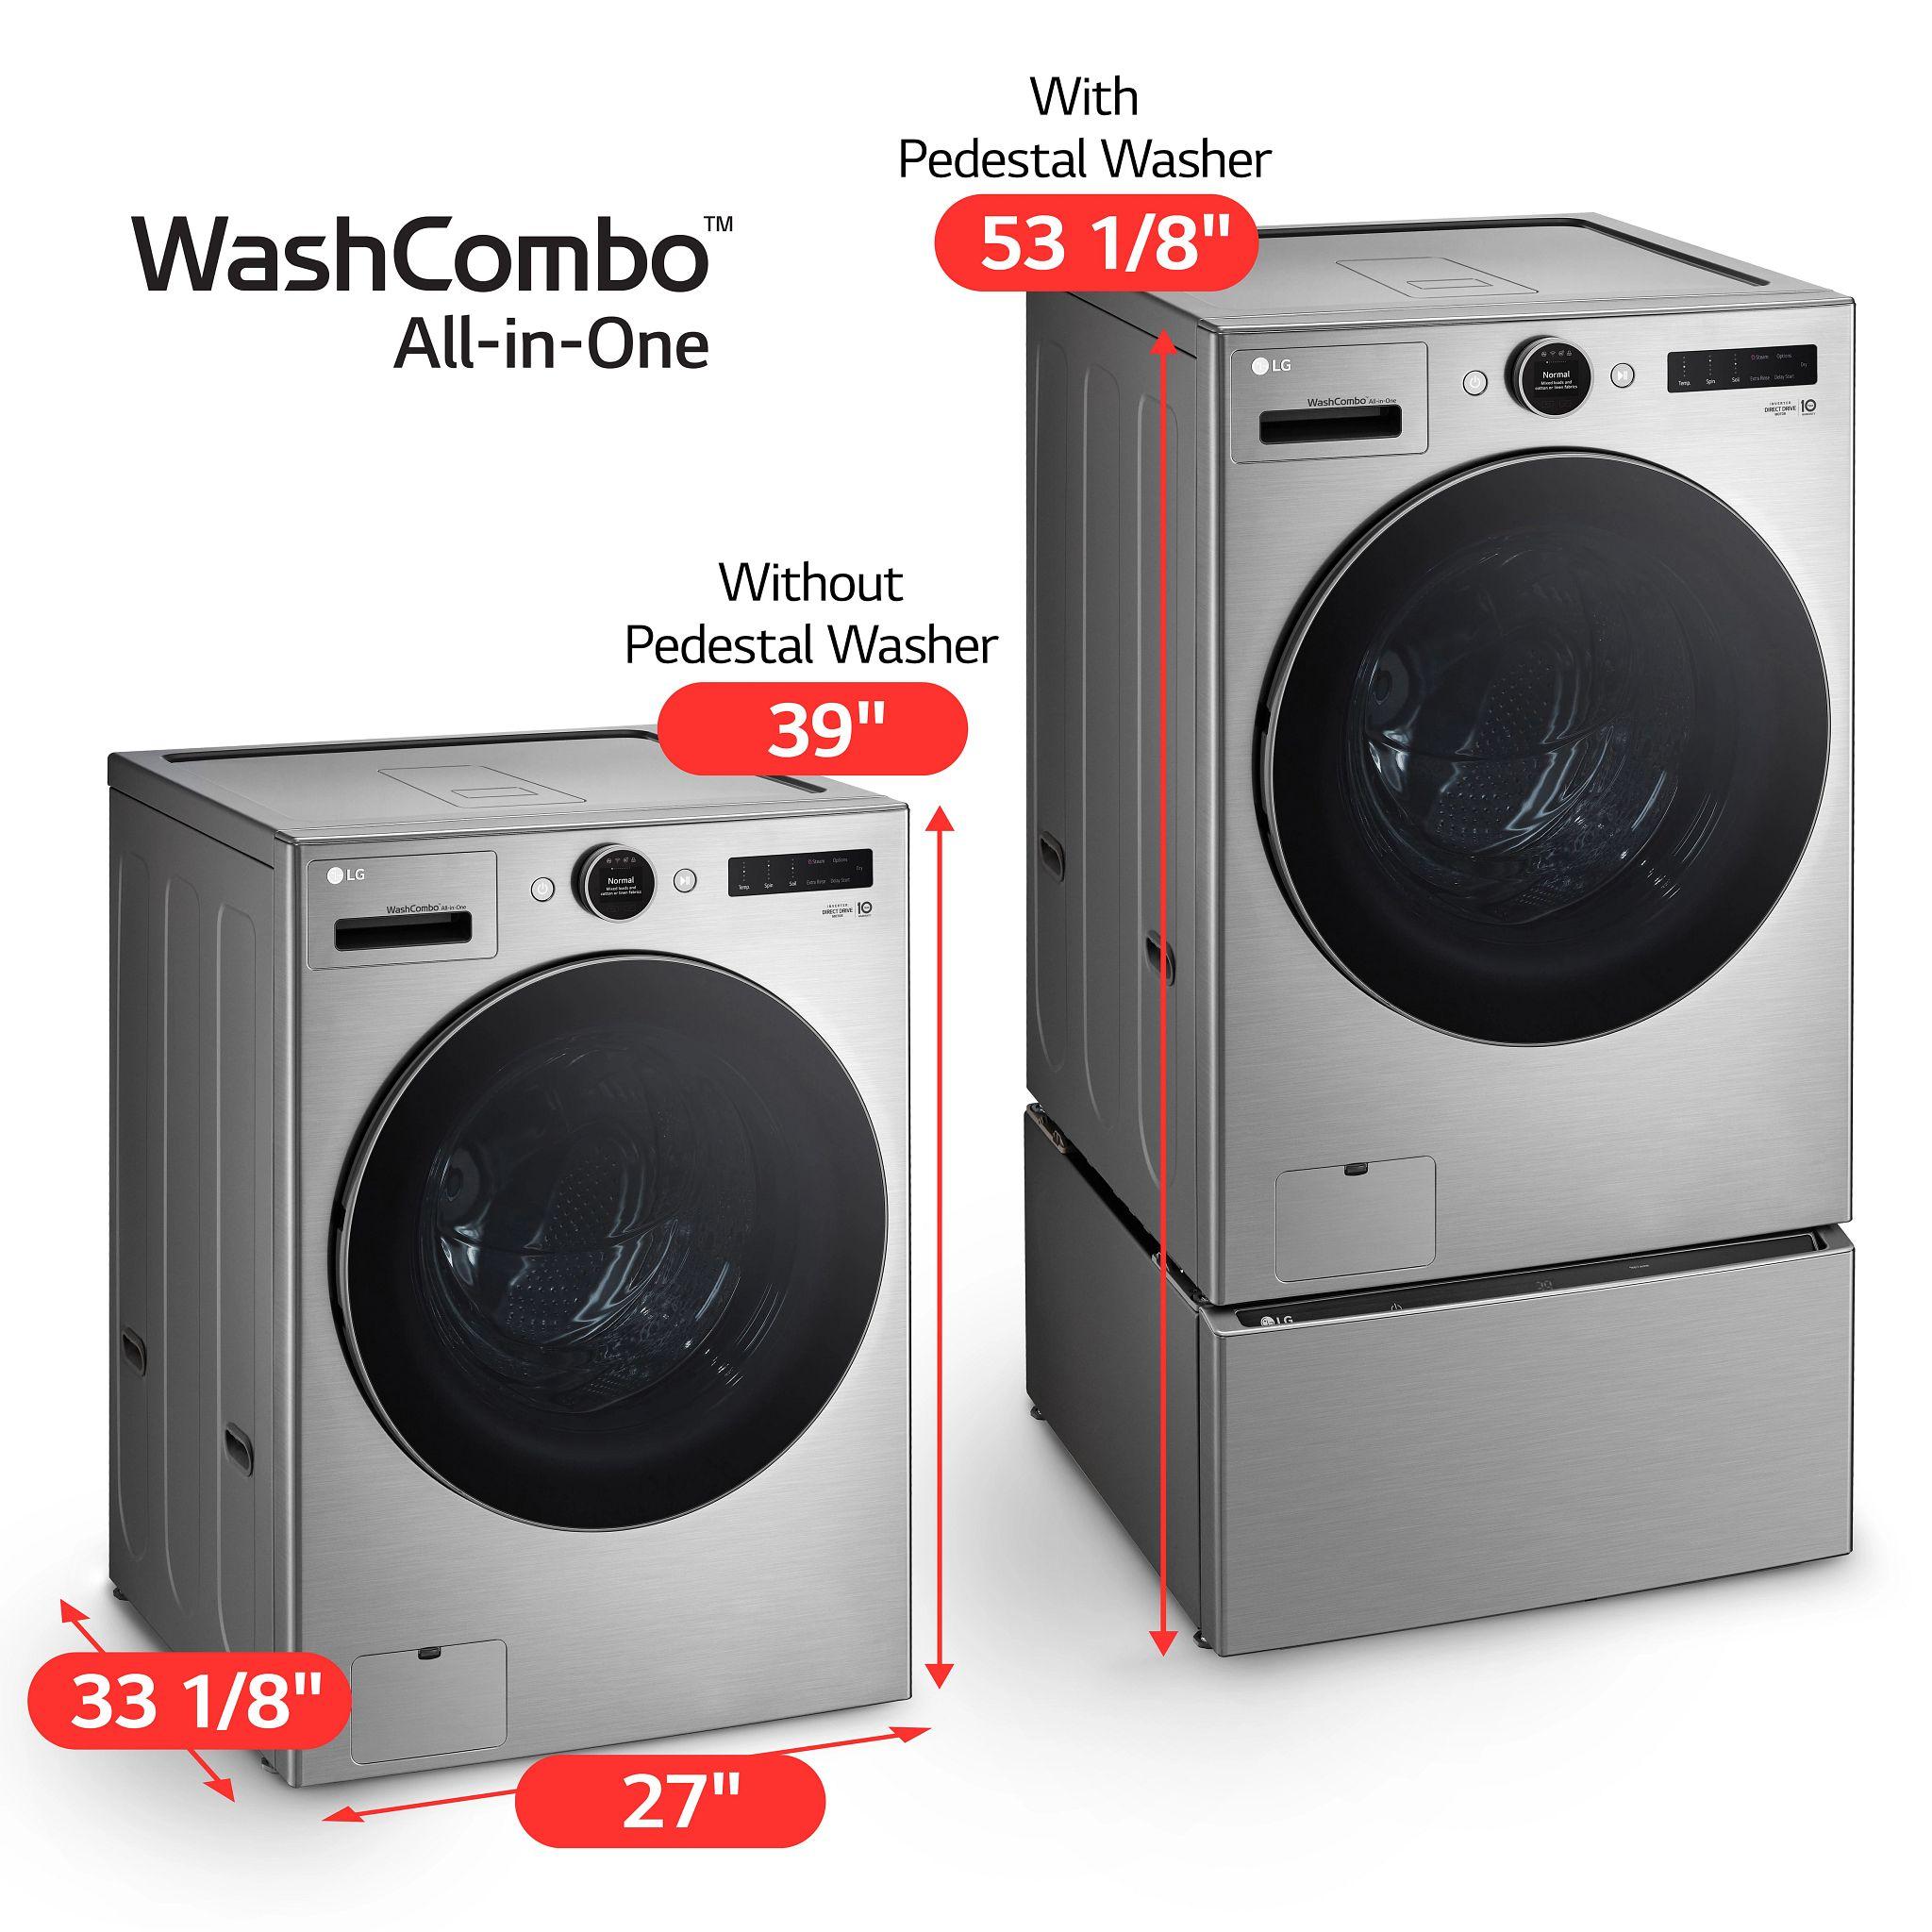 Lg Ventless Washer/Dryer Combo LG WashCombo™ All-in-One 5.0 cu. ft. Mega Capacity with Inverter HeatPump™ Technology and Direct Drive Motor